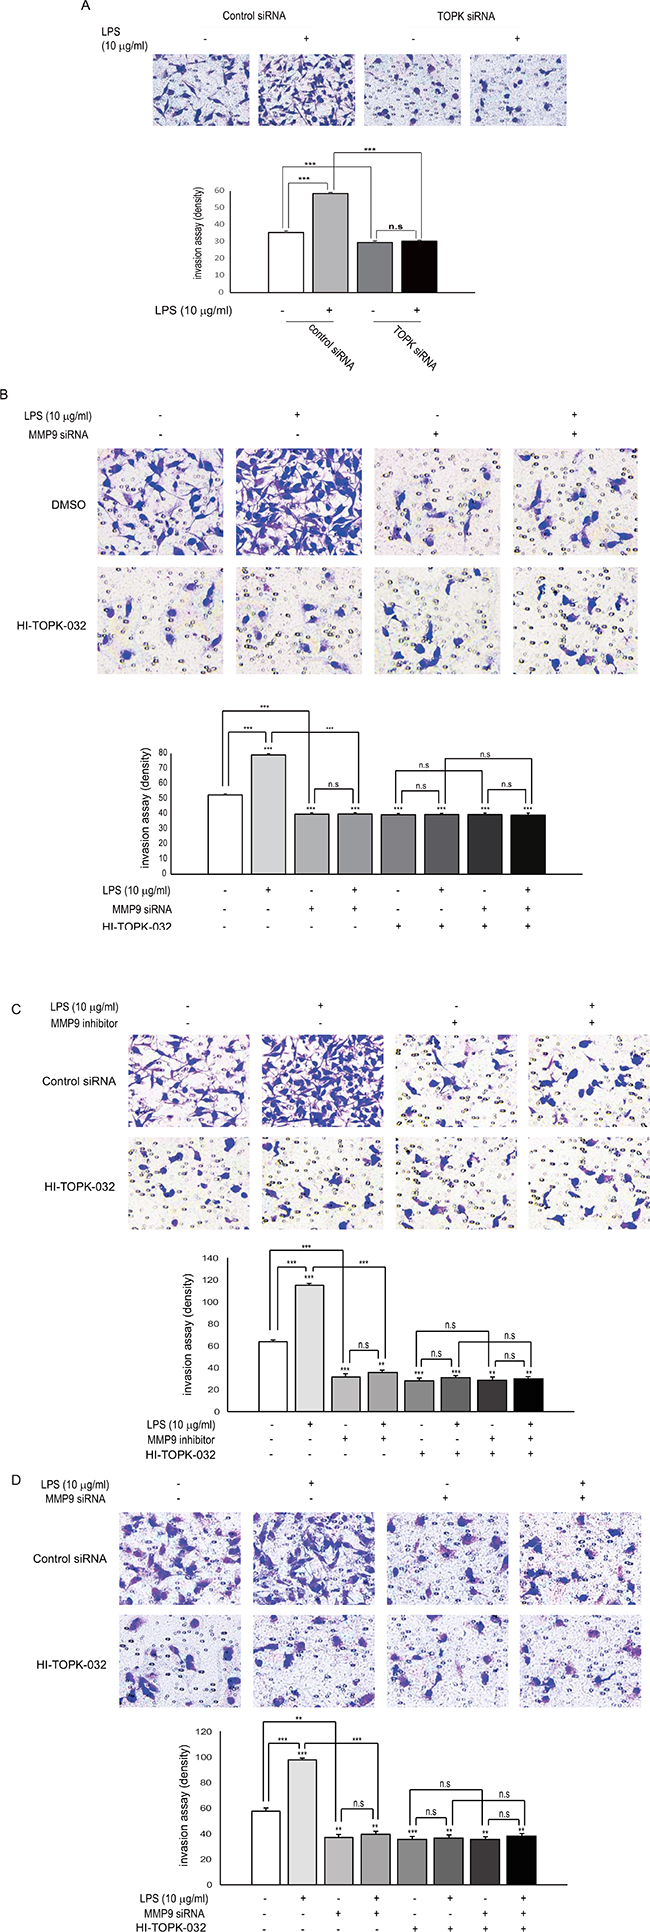 Both of expression or activity of MMP9 and TOPK are required for LPS-induced breast cancer cell invasion.